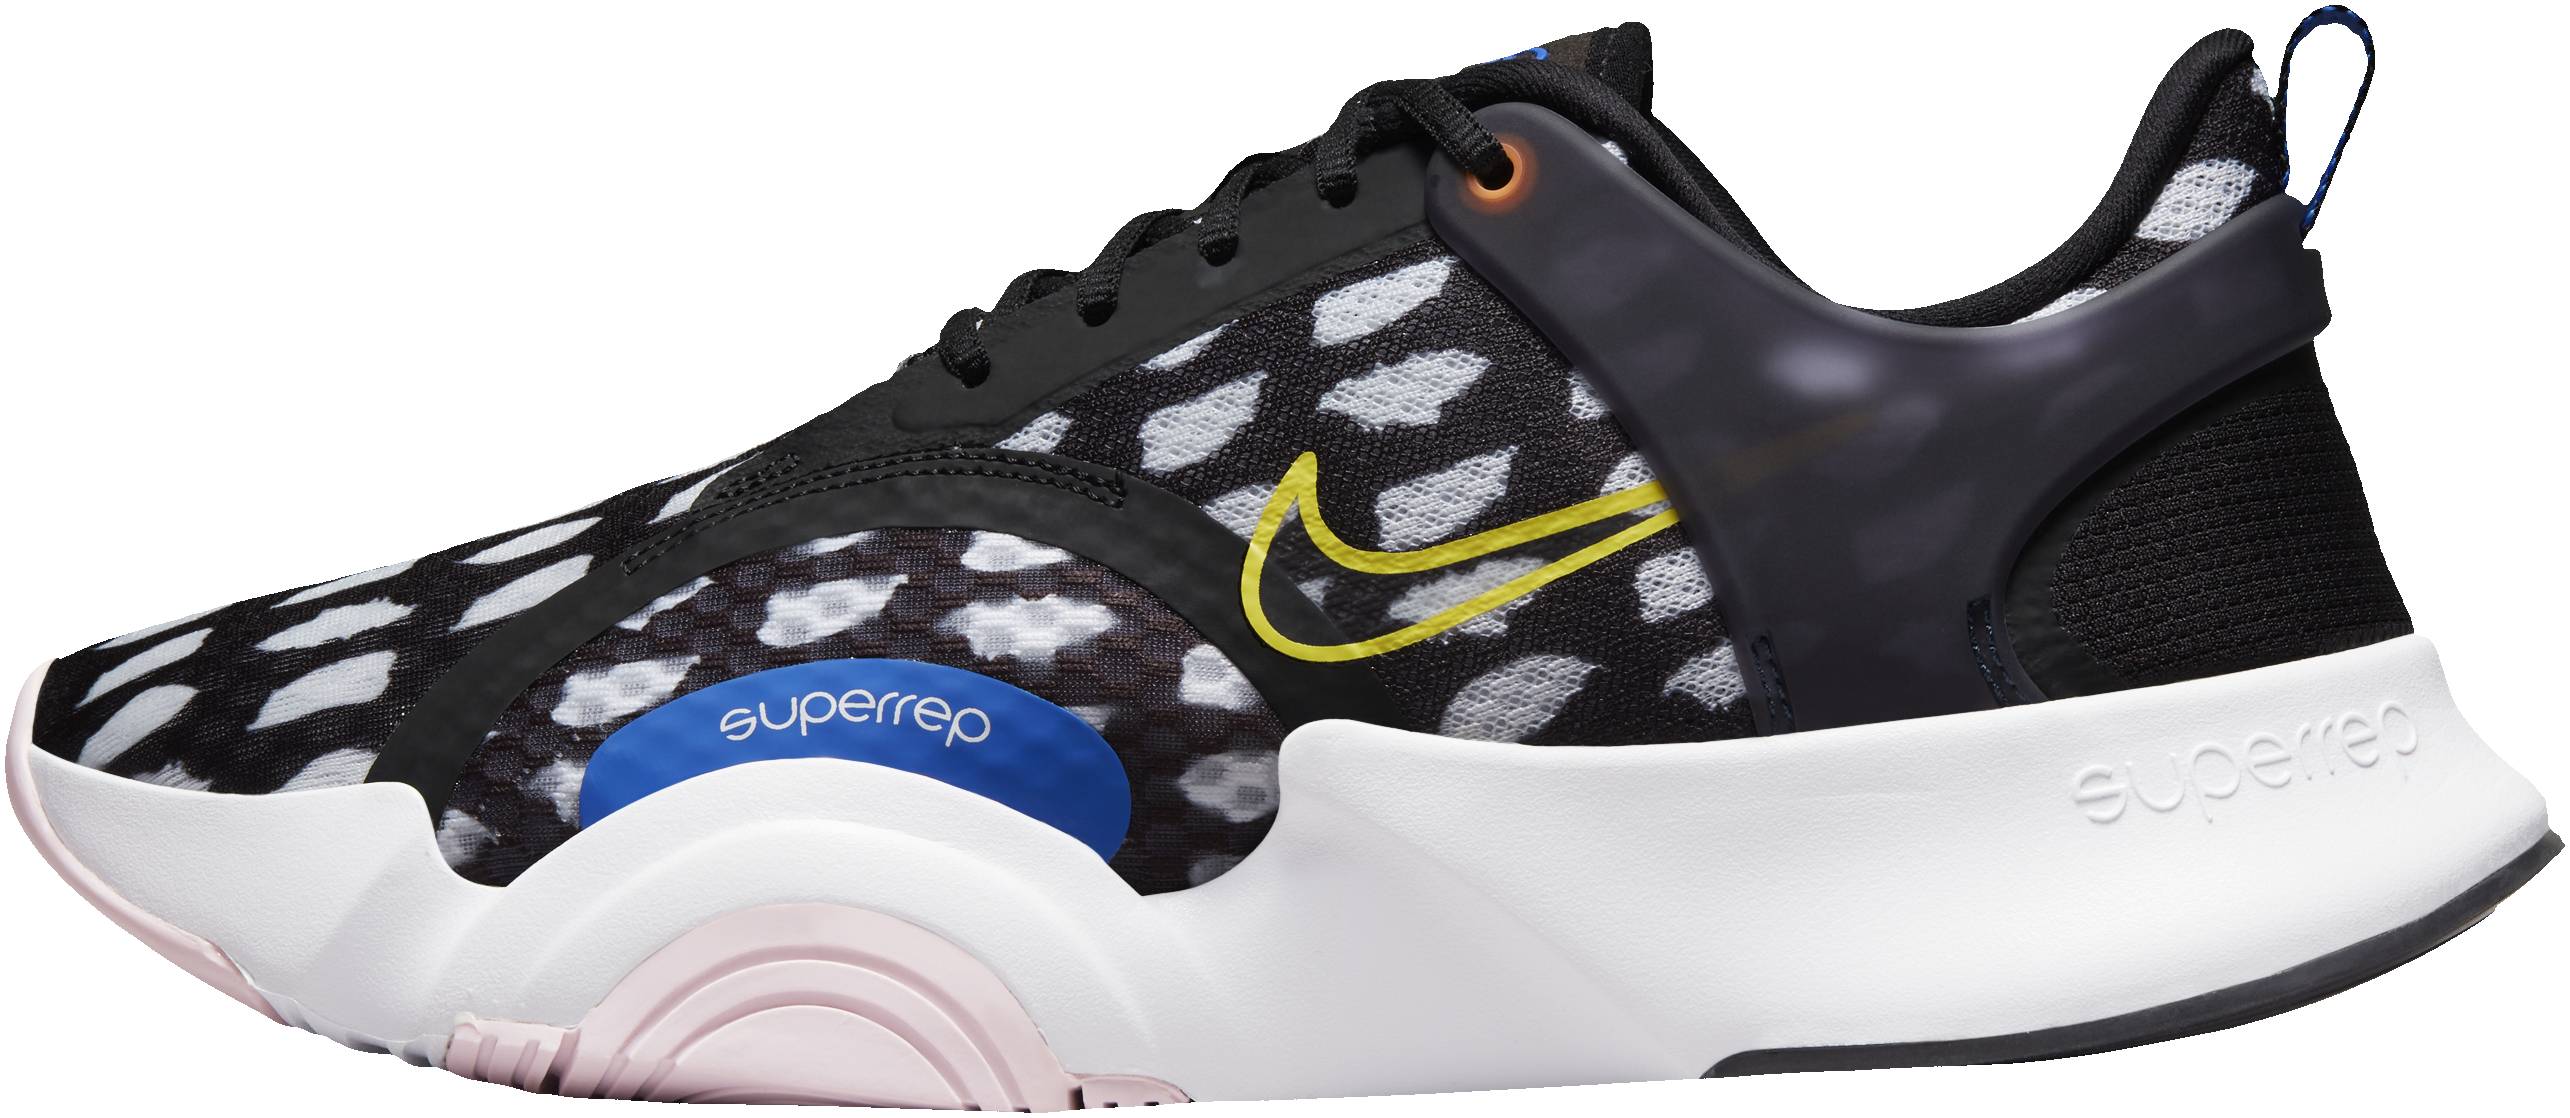 Nike nike superrep go training shoes SuperRep Go 2 Review 2022, Facts, Deals ($60) | RunRepeat